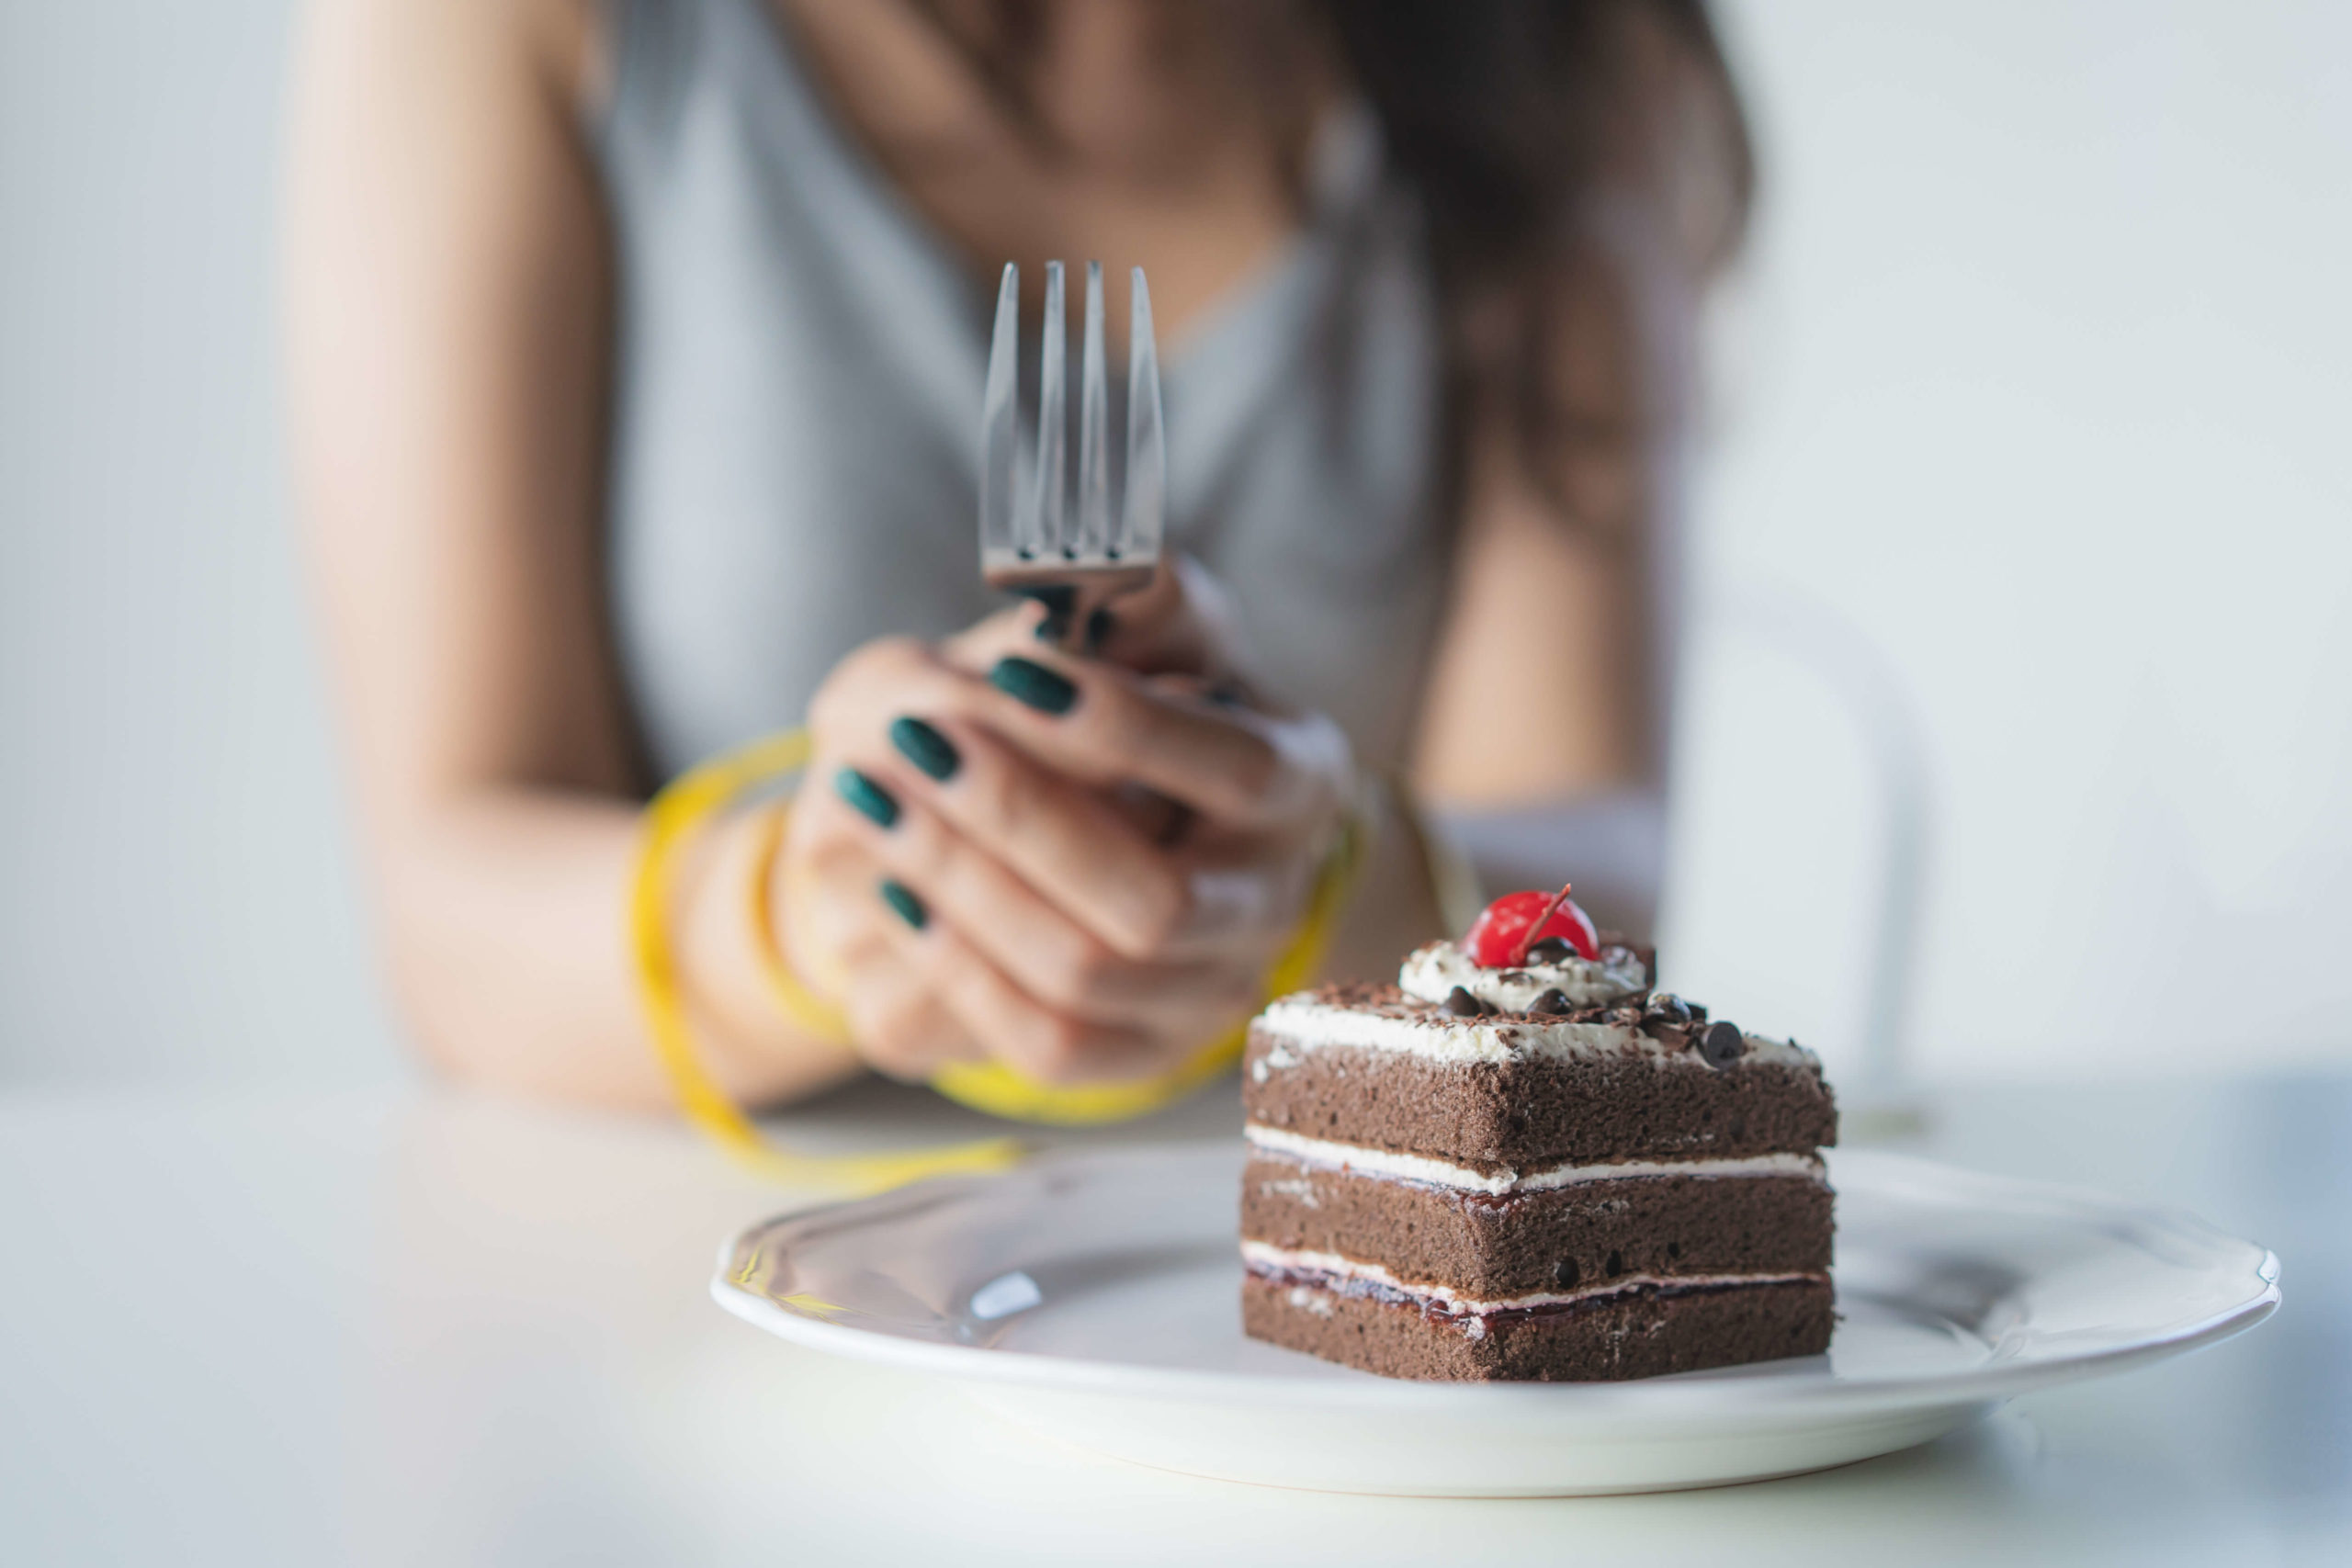 Do Desserts Have Any Nutritional Value?